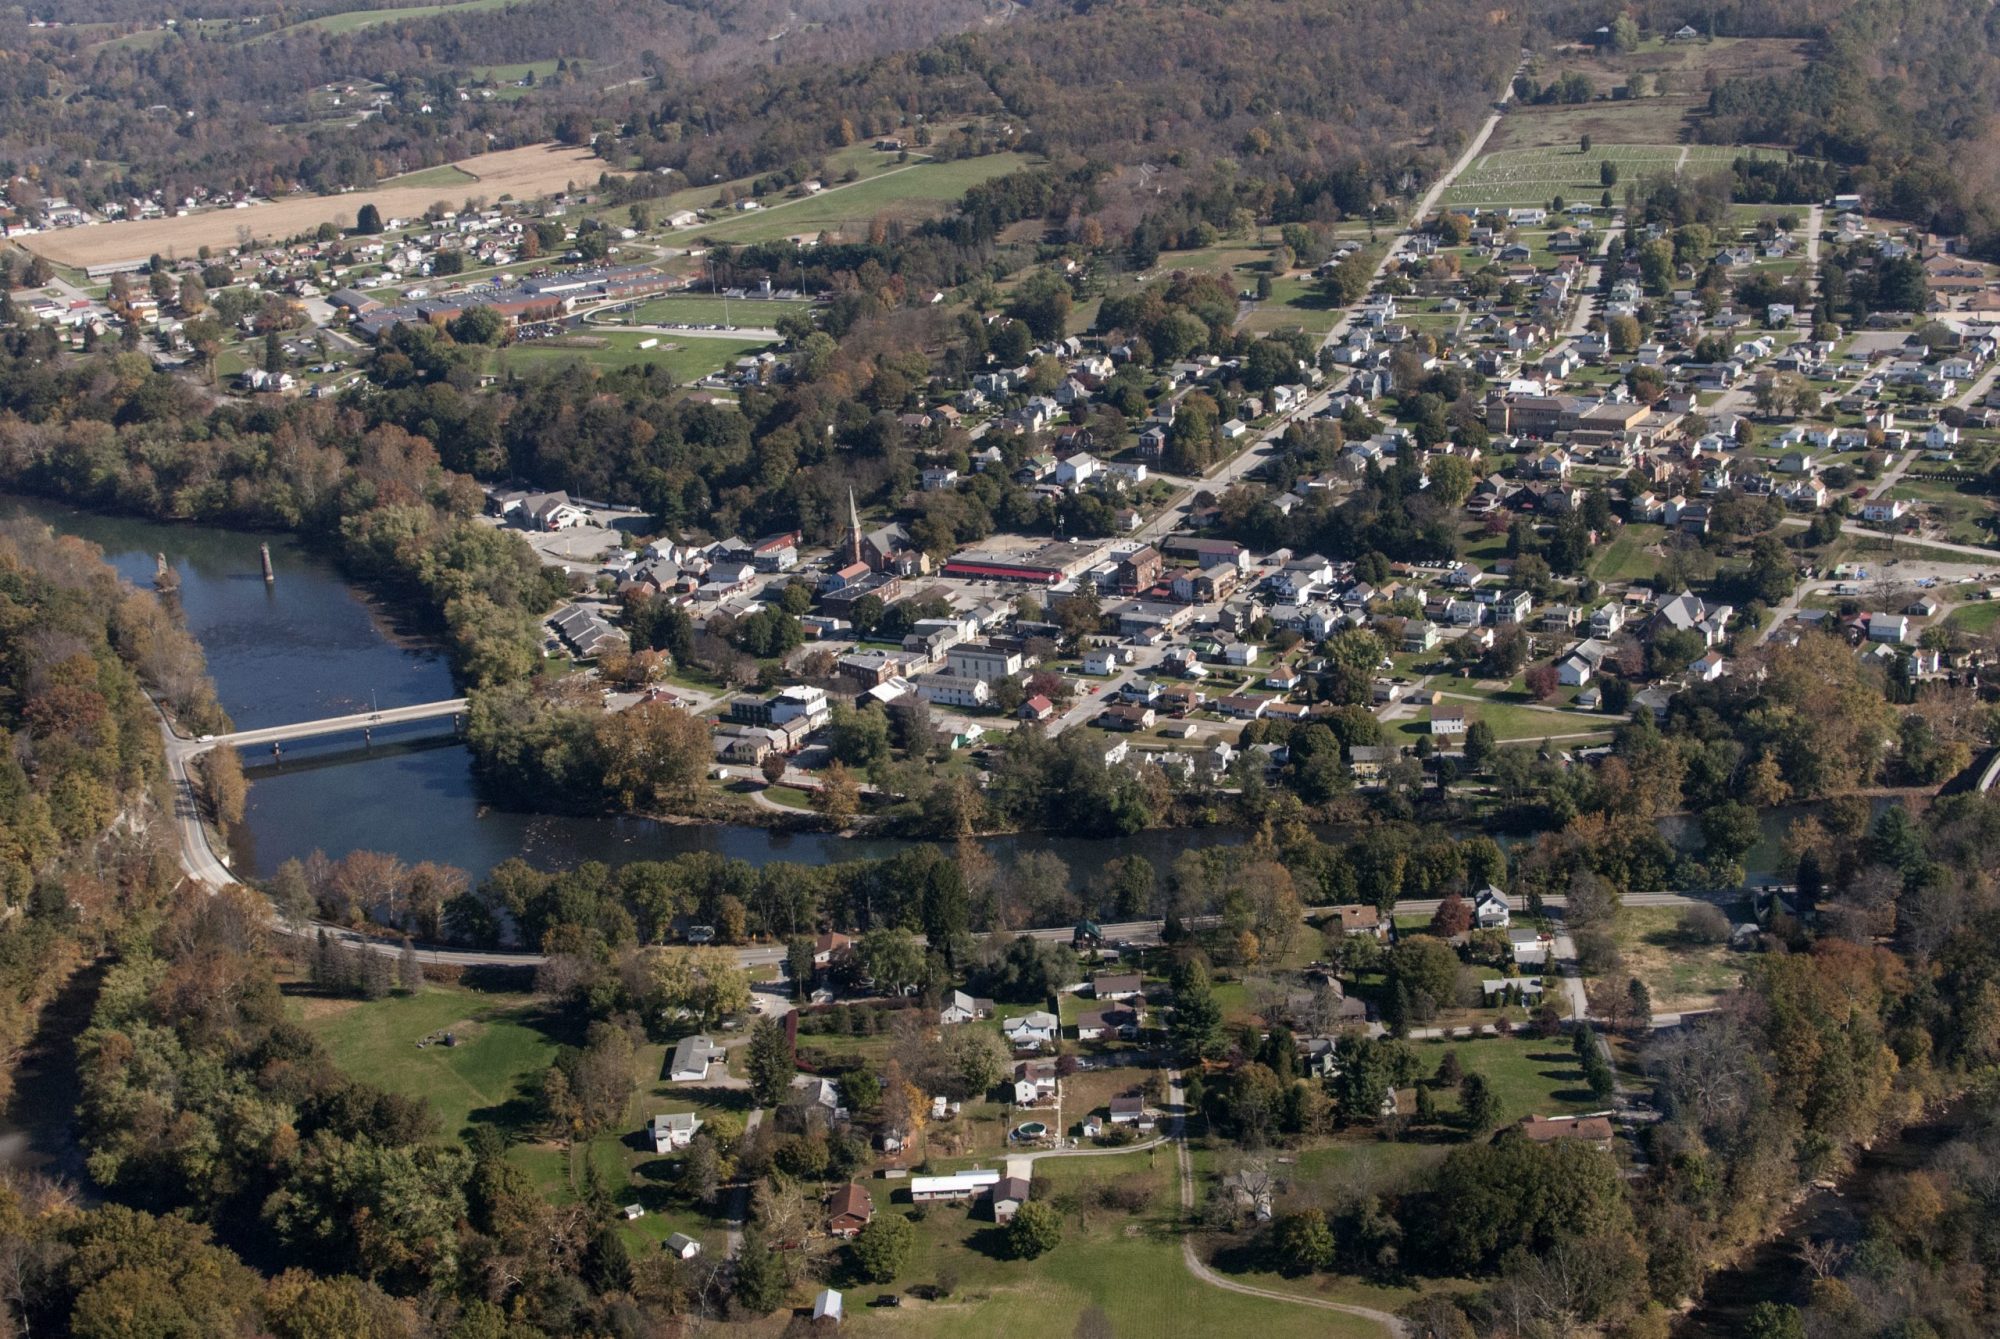 Scenic birds-eye view of a town in Beaver County